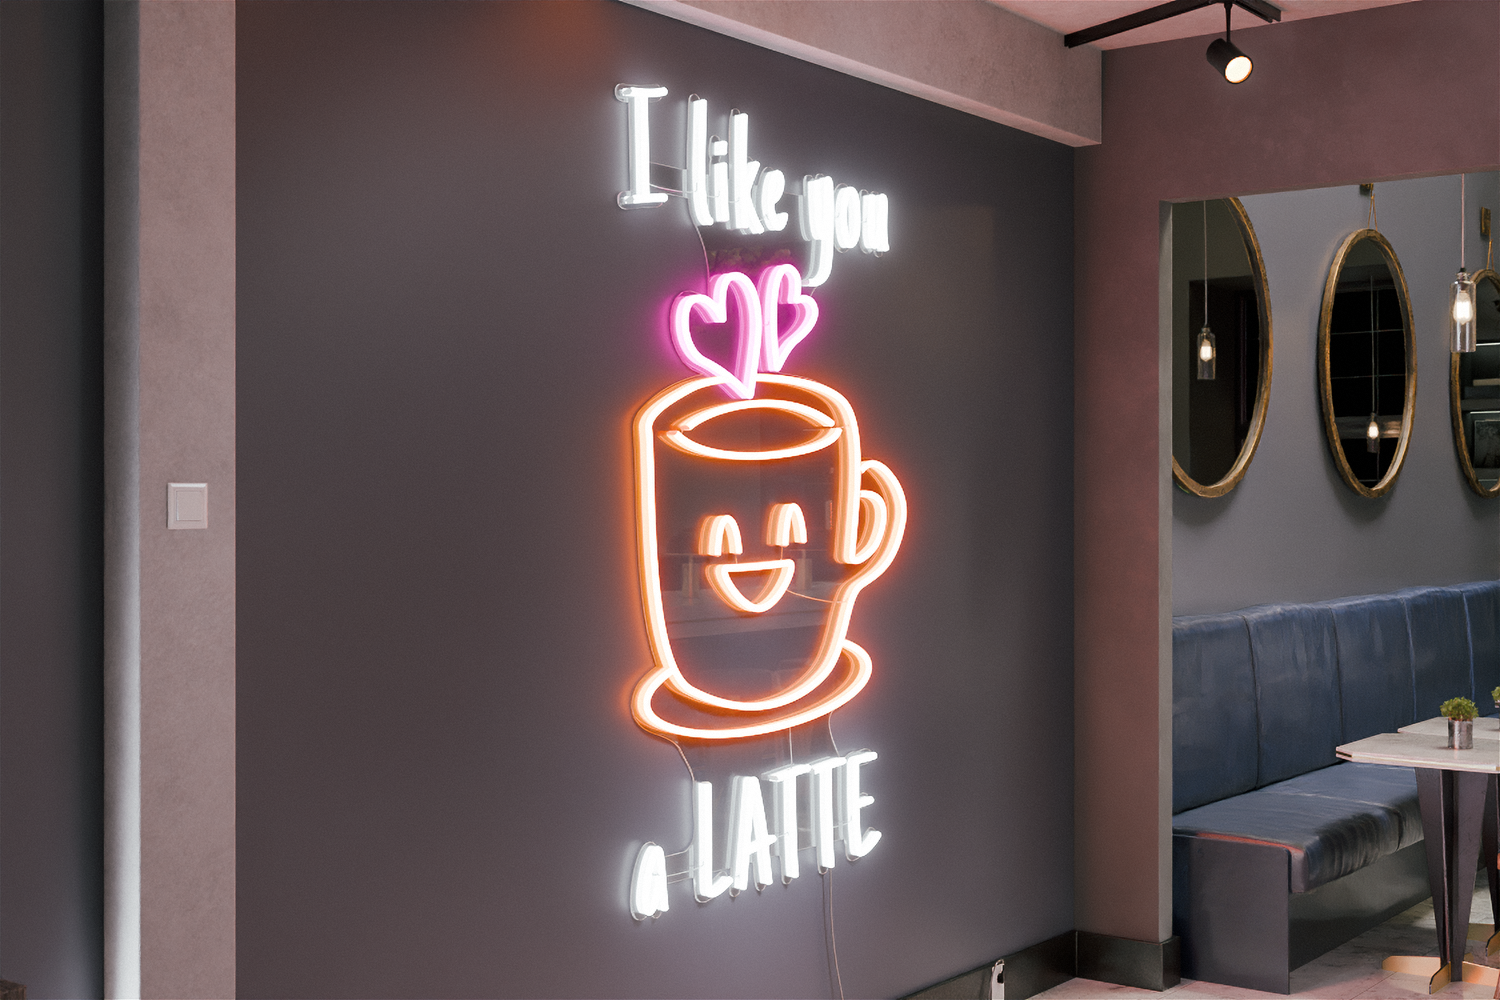 a neon sign that says "i like you a latte"